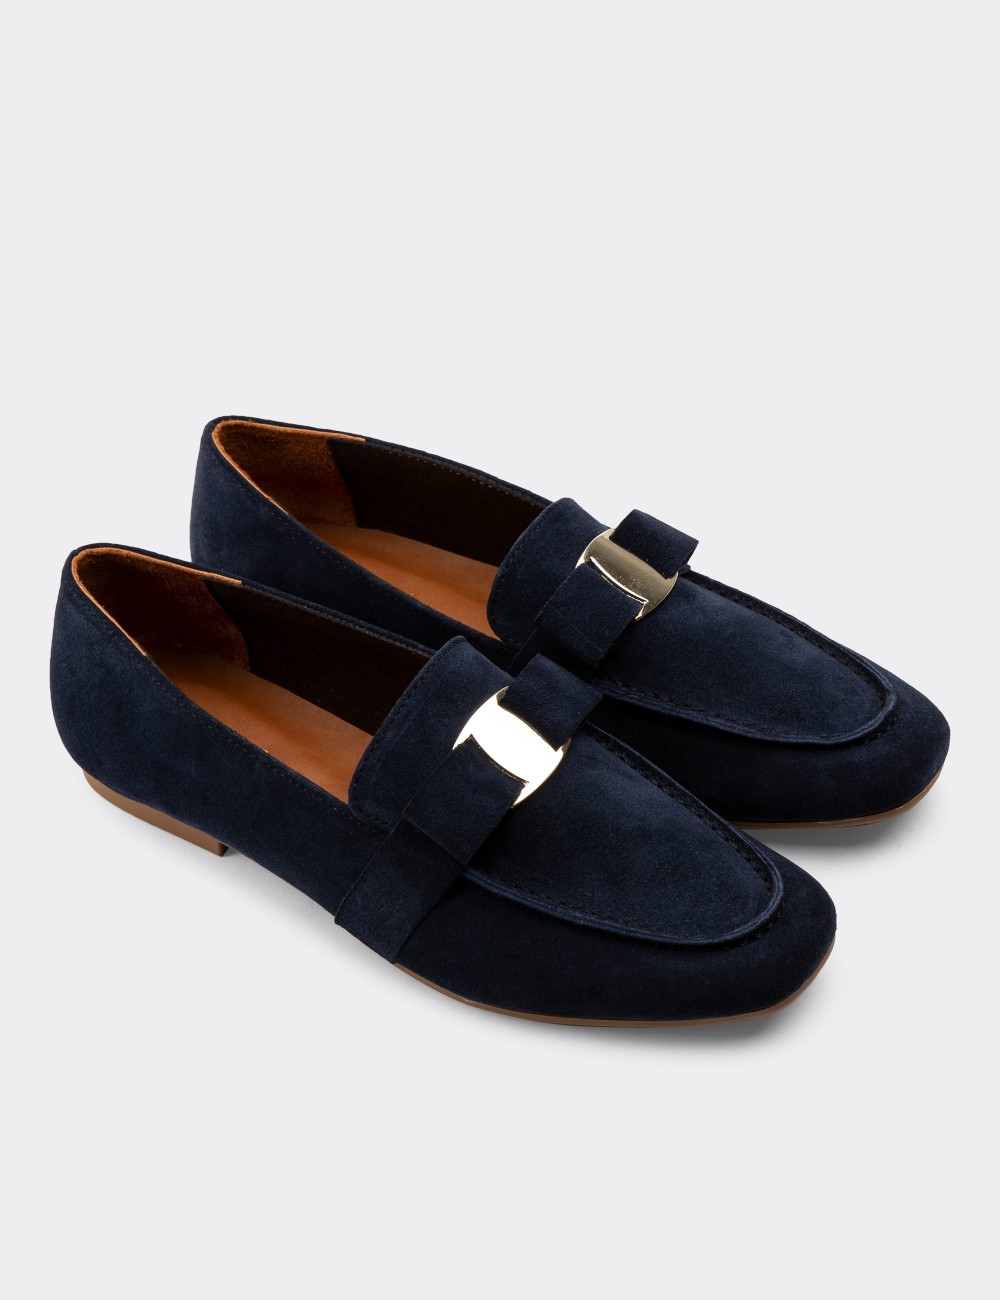 Navy Suede Leather Loafers - 01913ZLCVC01